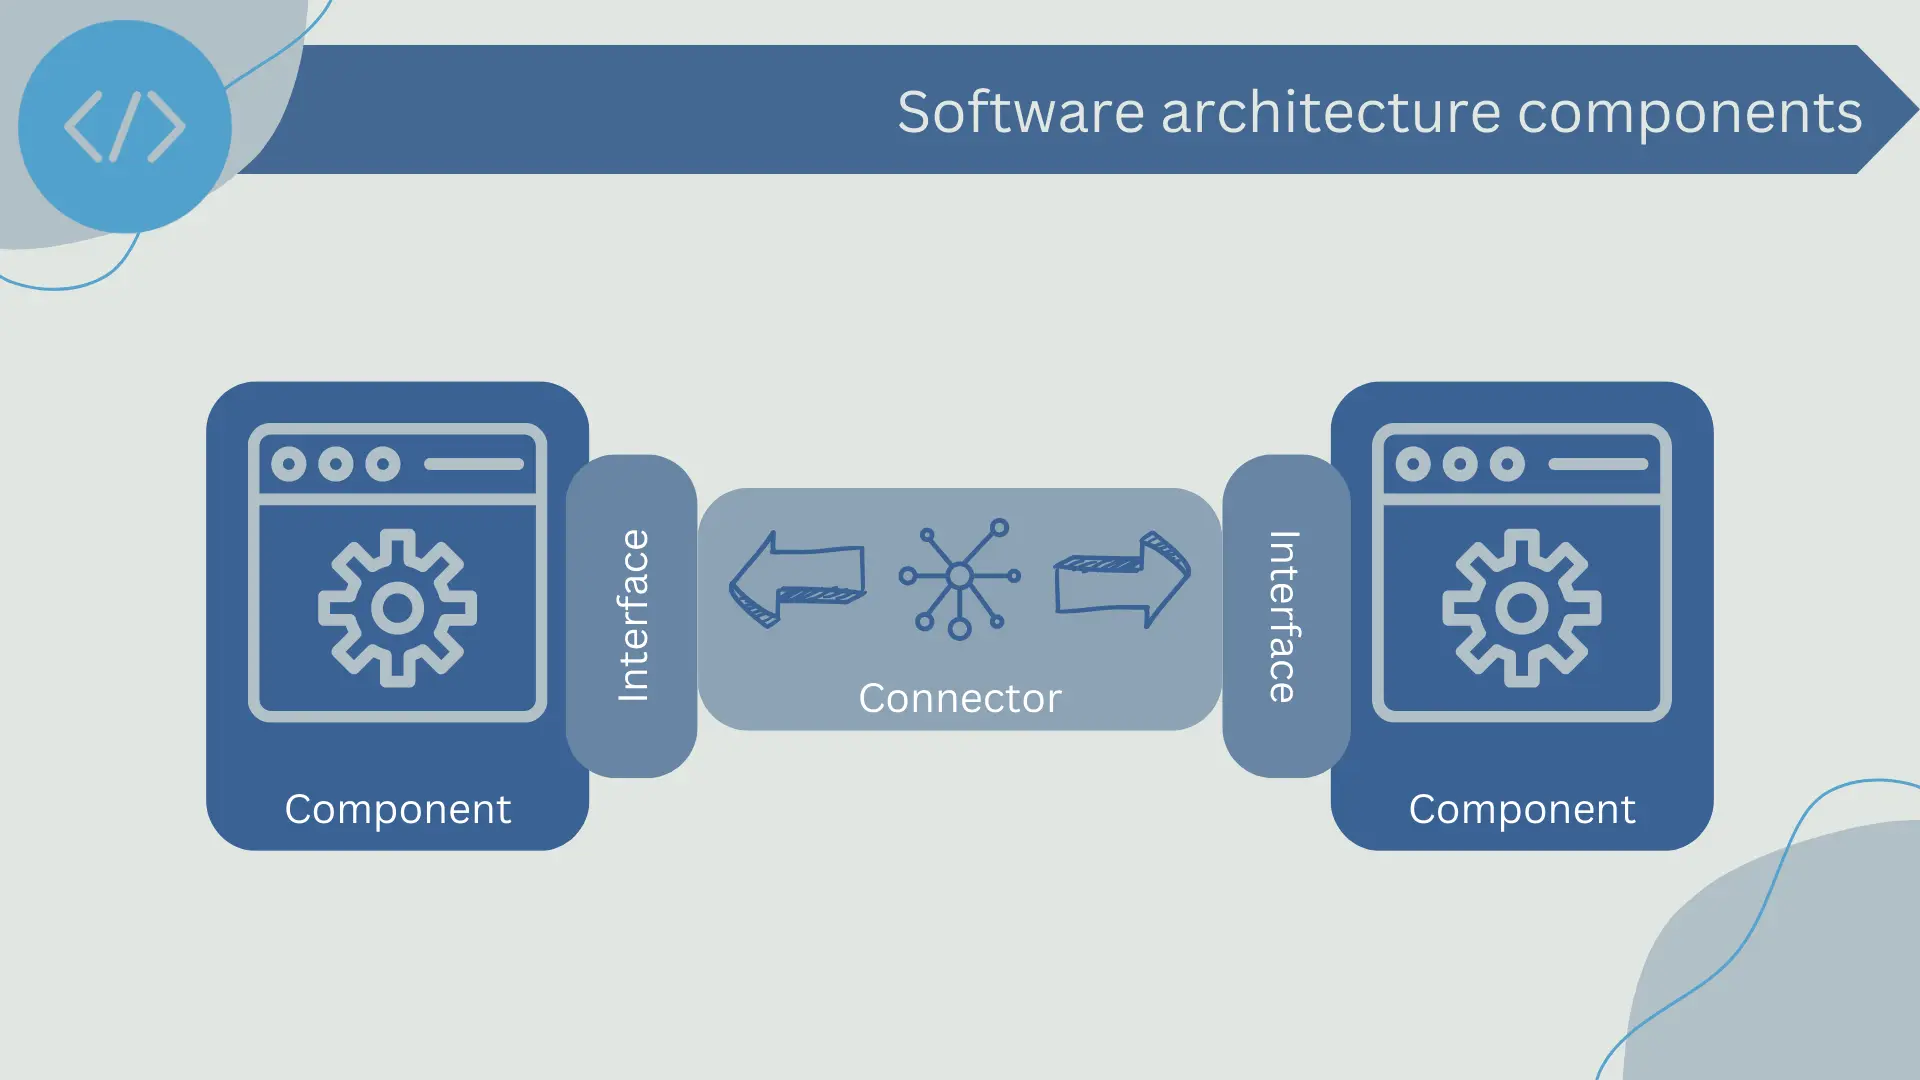 Software architecture components